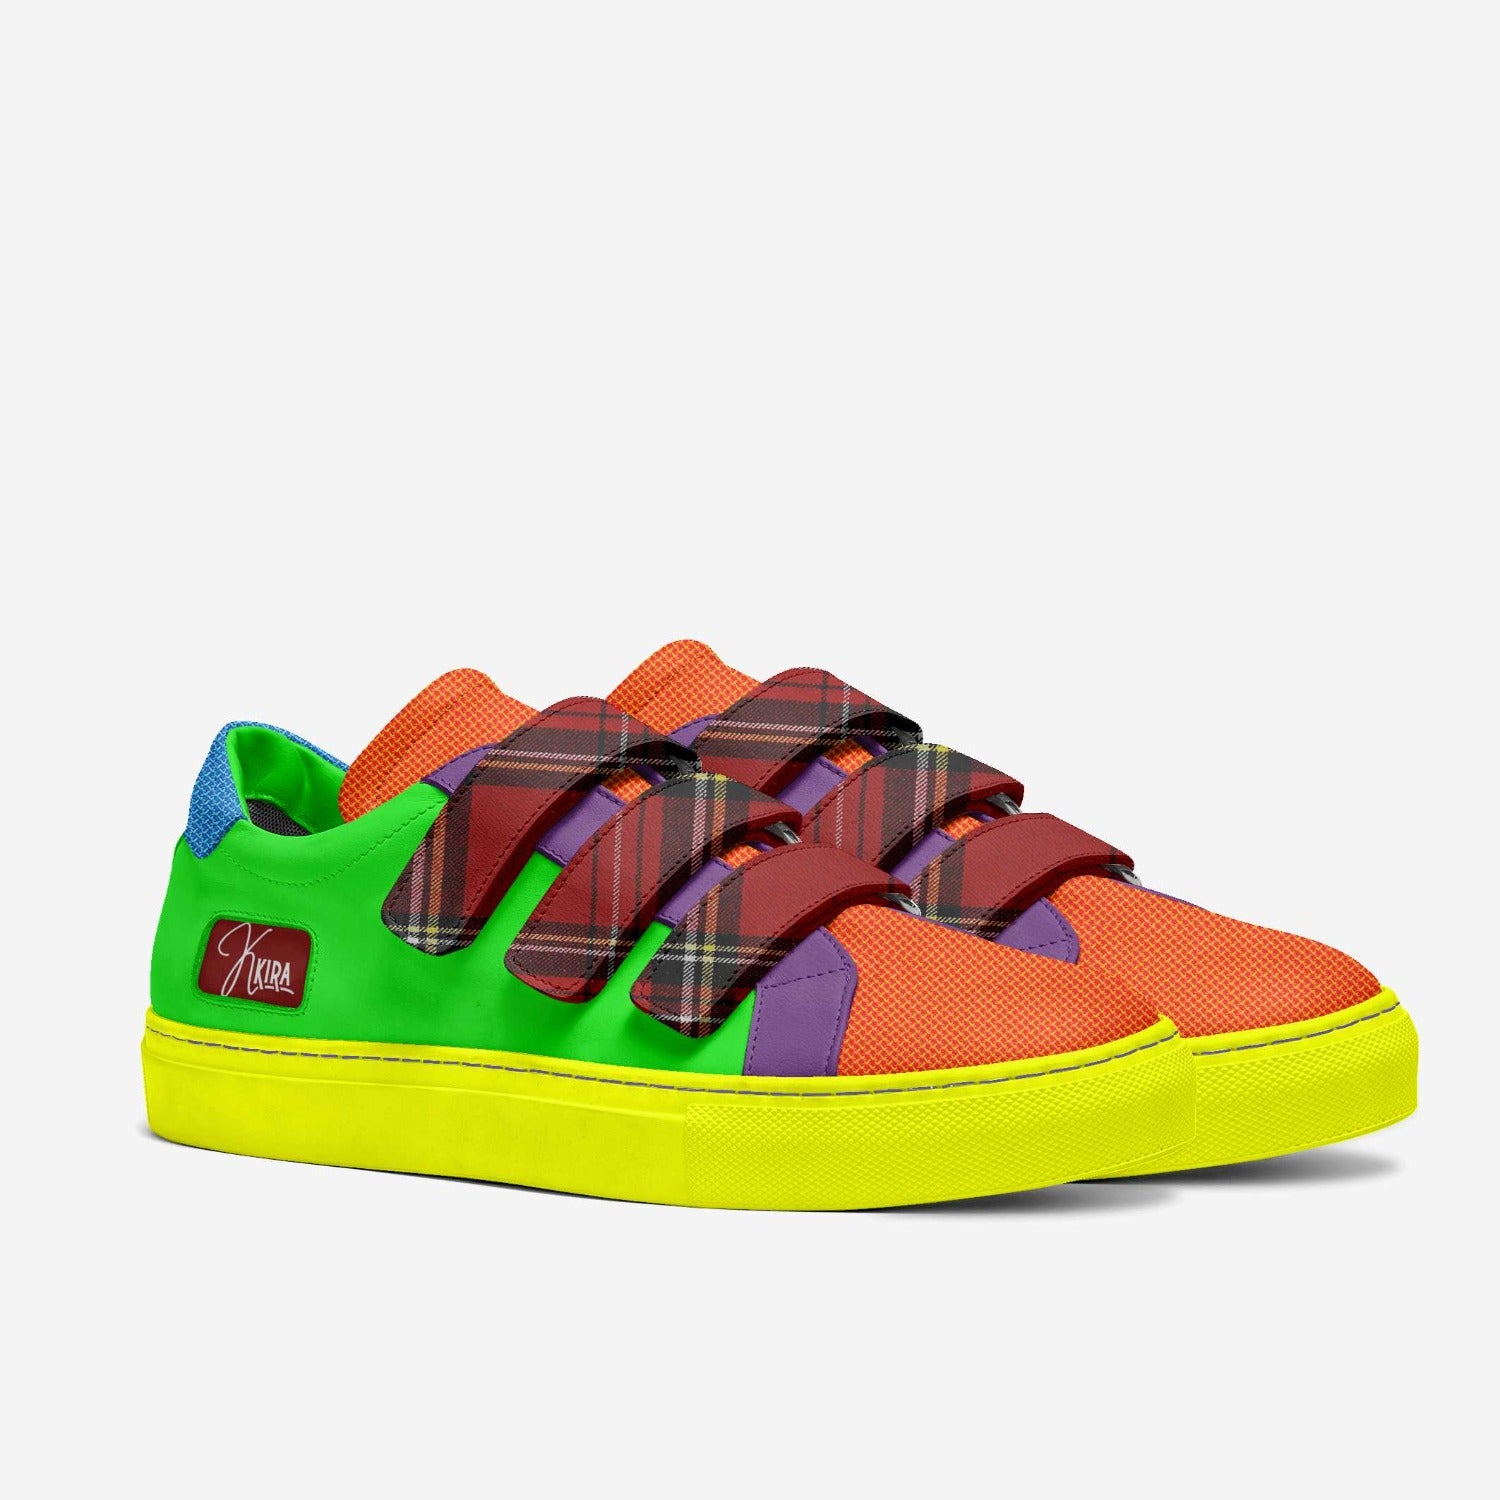 Unisex Colorful Sneakers | Colorful Sneakers | Kkira Shoes